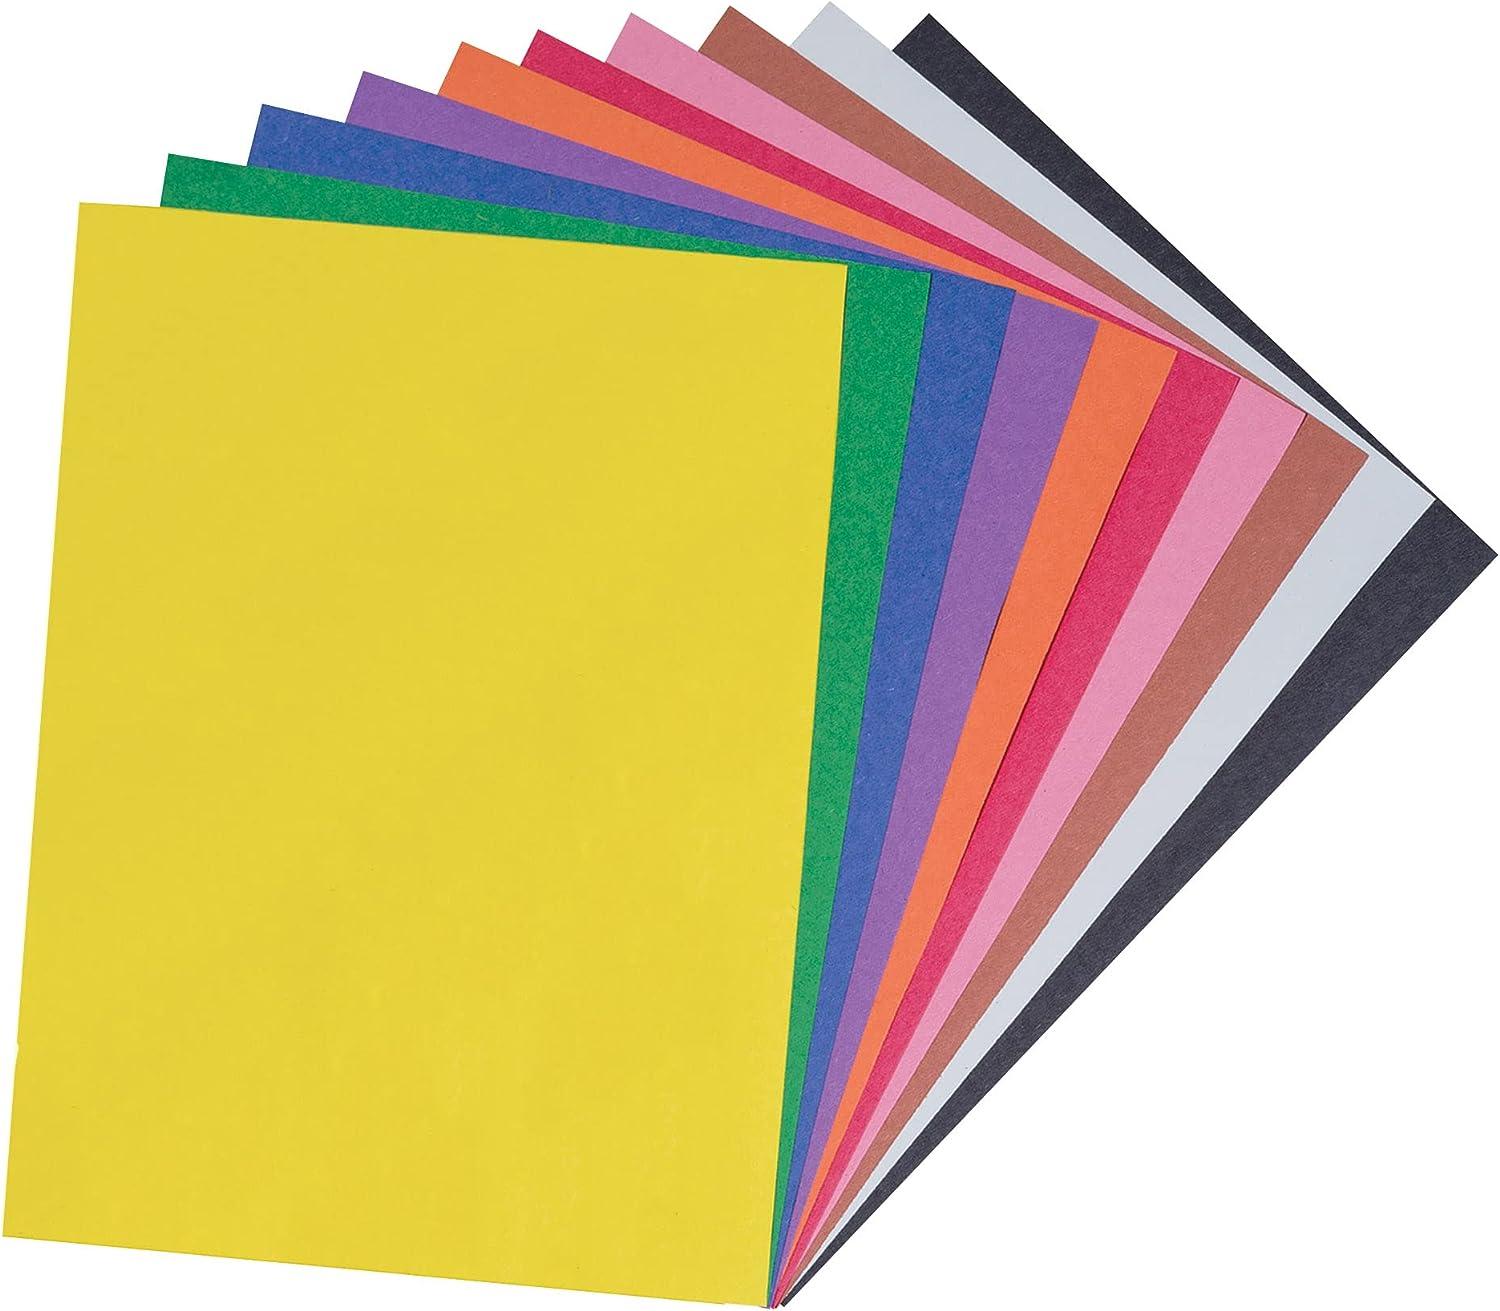  Tru-Ray Extra Large Construction Paper, 24 x 36 Inches, Black,  50 Sheets : Arts, Crafts & Sewing